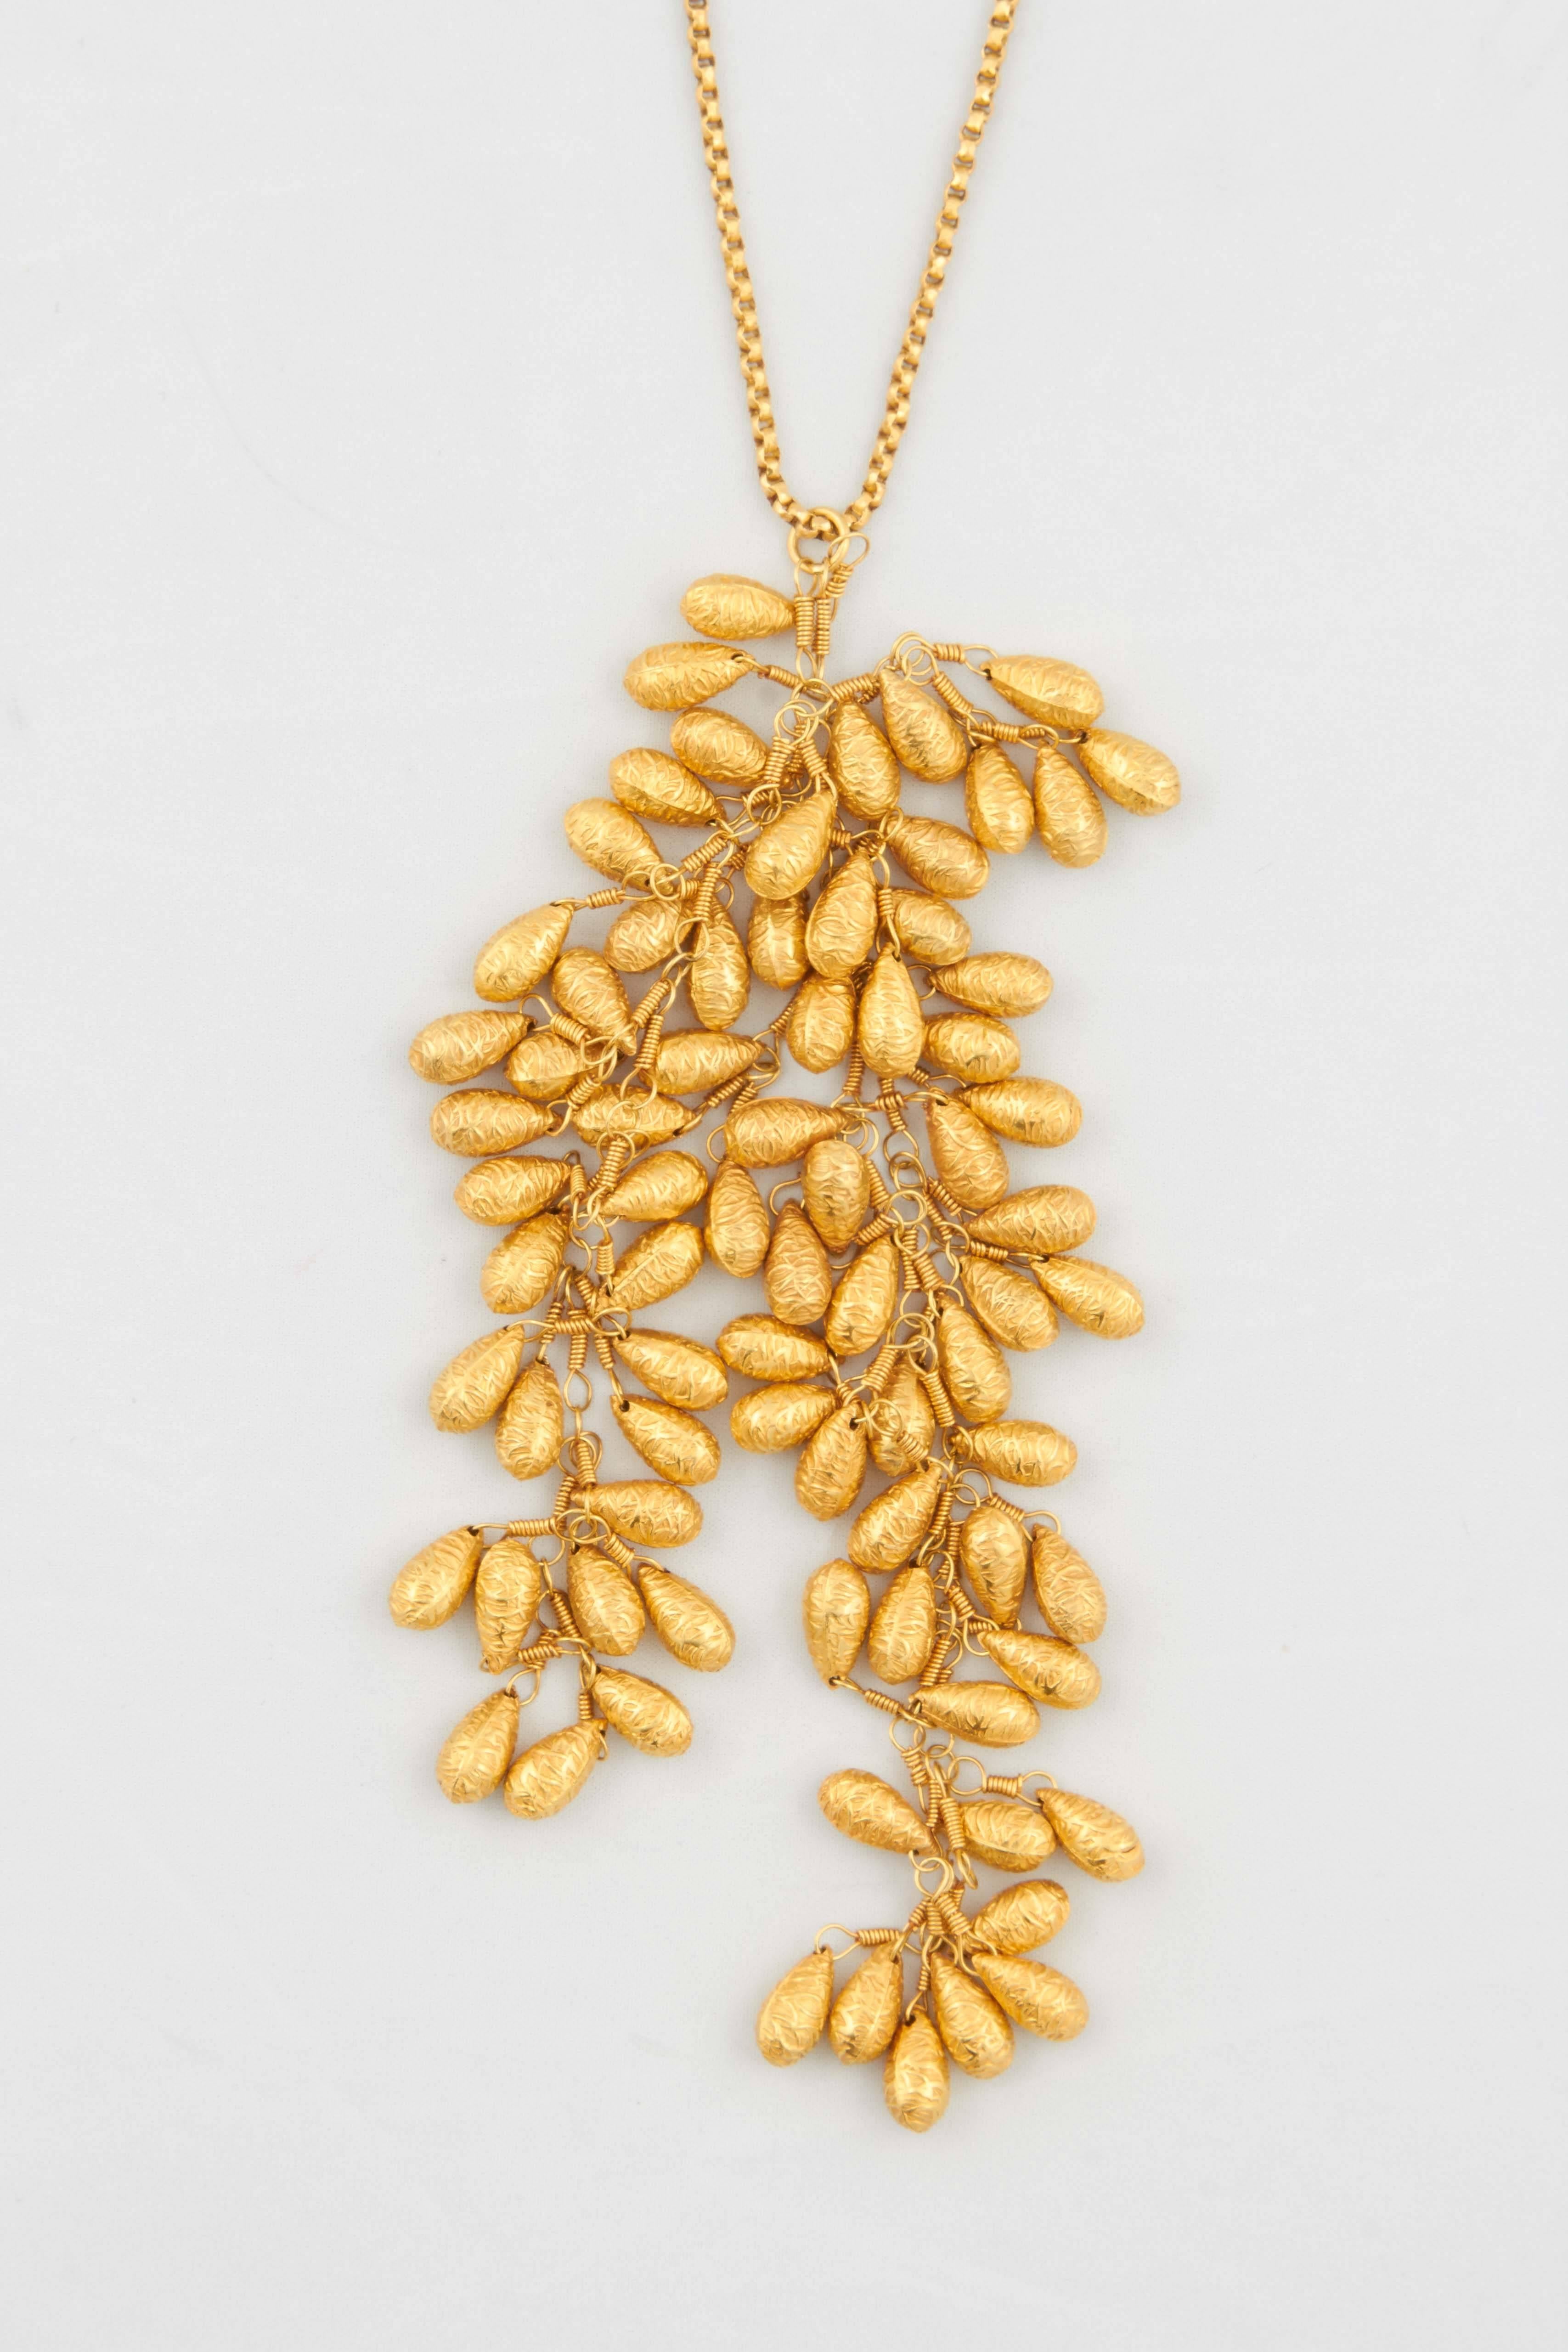 An 18kt yellow gold necklace composed of a cascading pendant containing two 18kt yellow gold grape vines. There are also two small cascading grape vines on either side of the clasp. The length of the chain is 23". The length of the necklace